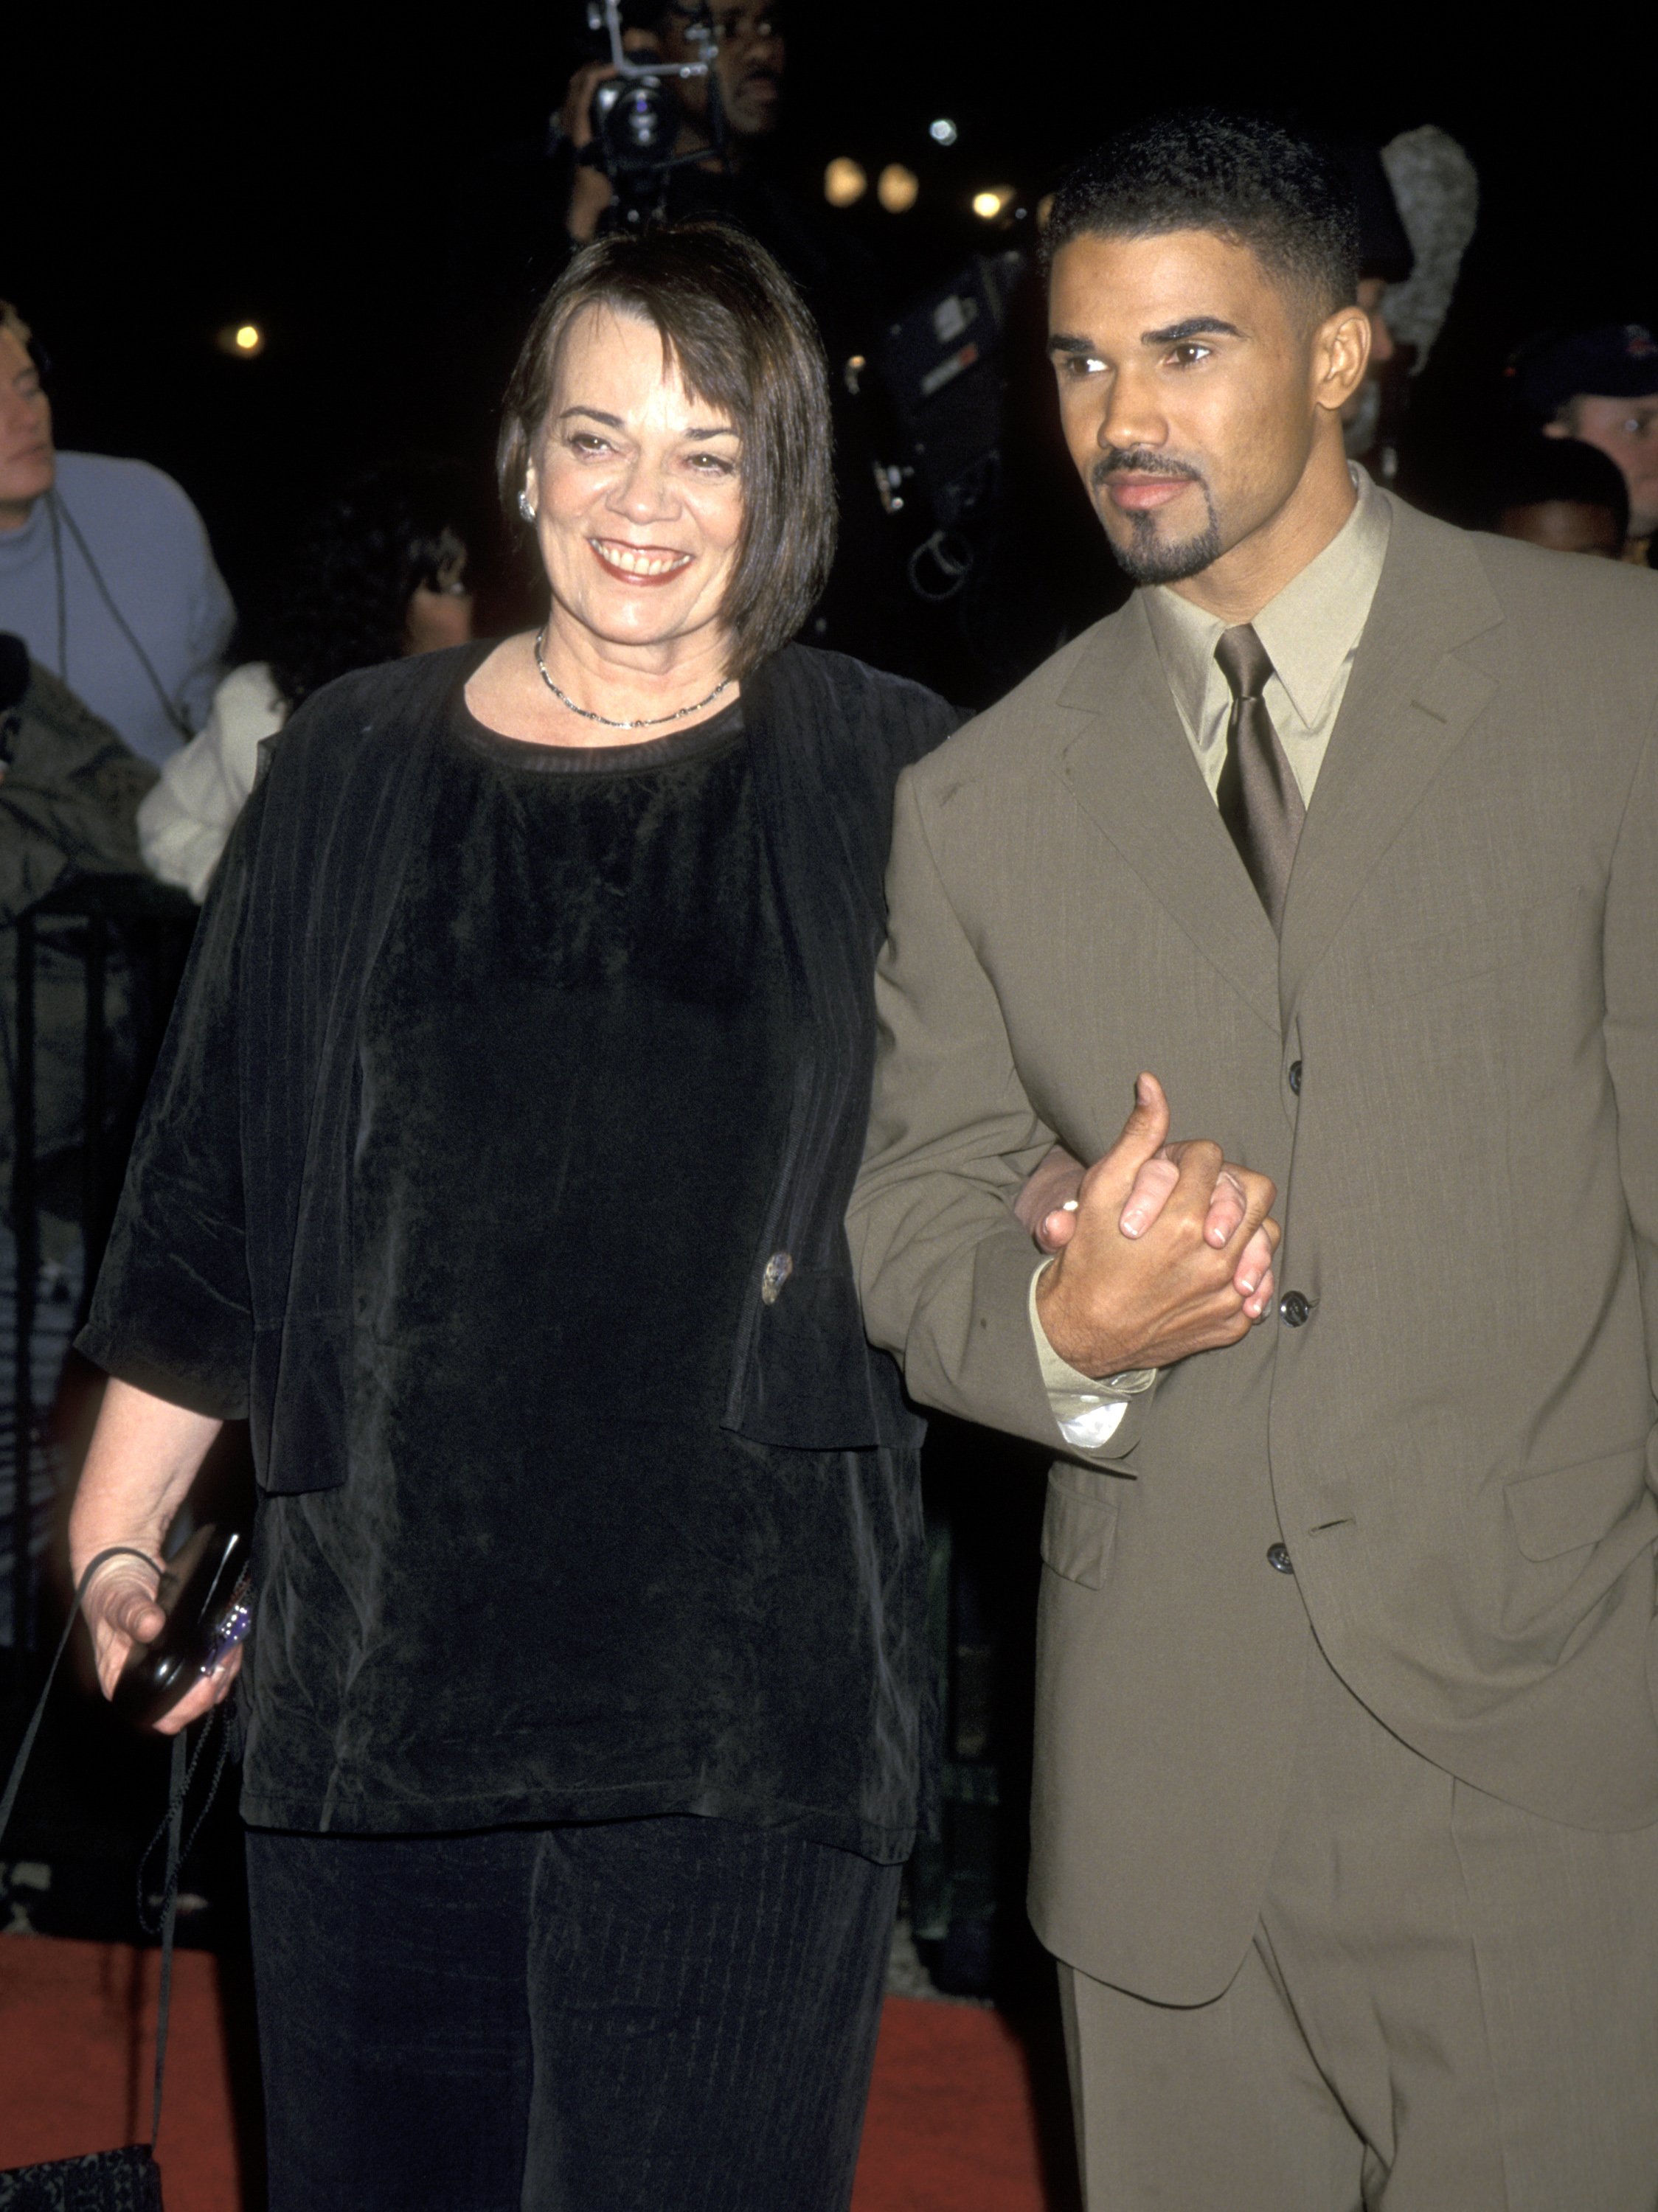 Shemar Moore and his mother, Marilyn Joan Wilson-Moore at the 31st Annual NAACP Image Awards on February 12, 2000 | Source: Getty Images